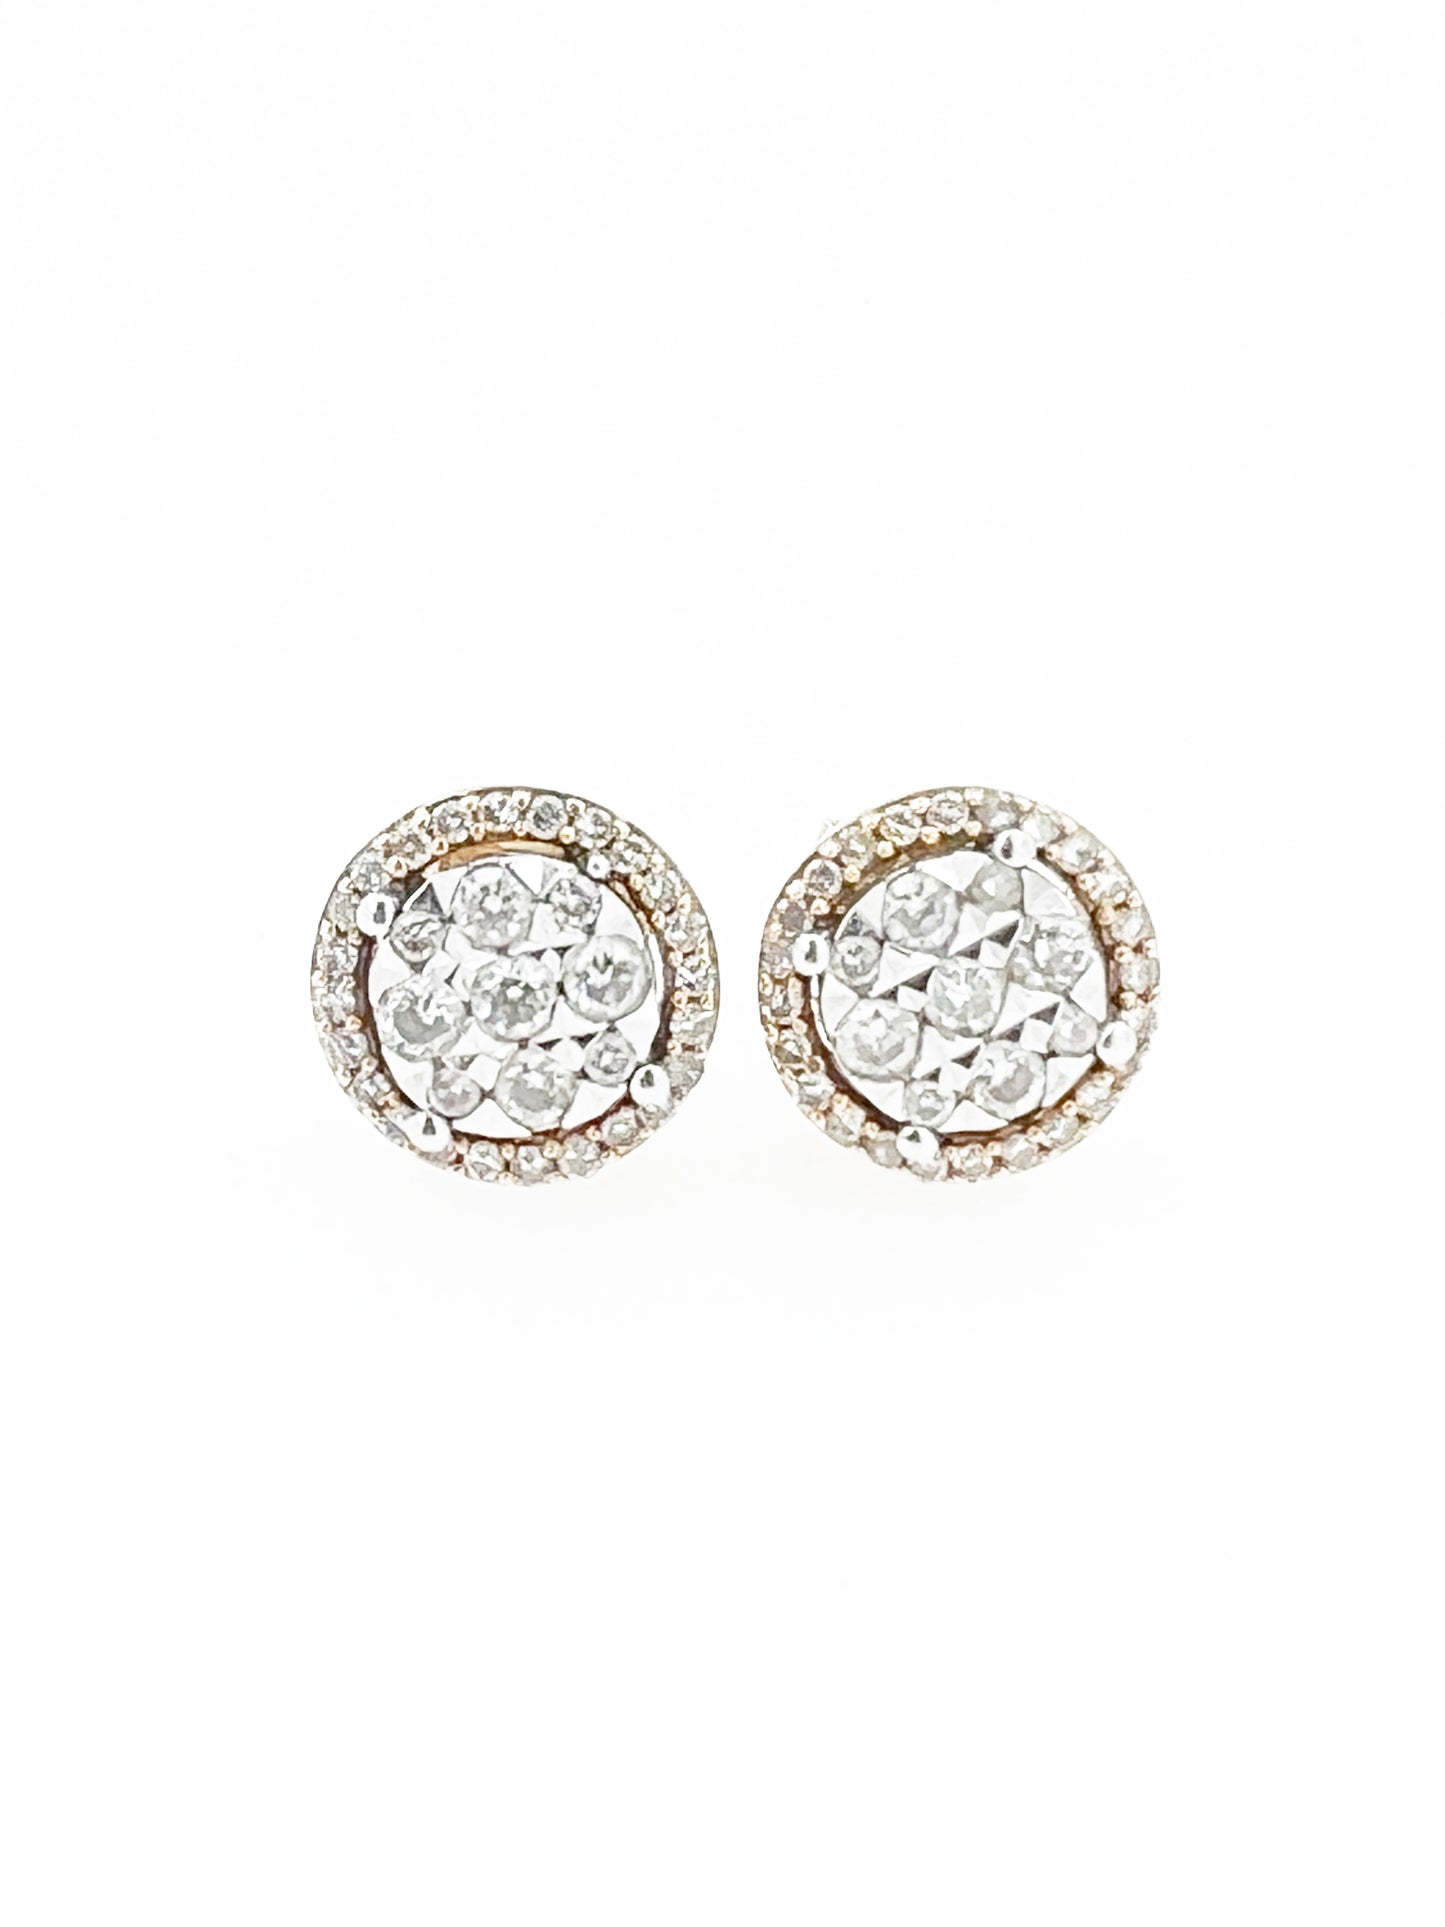 Natural Diamond Halo Cluster Earrings in 10k Gold